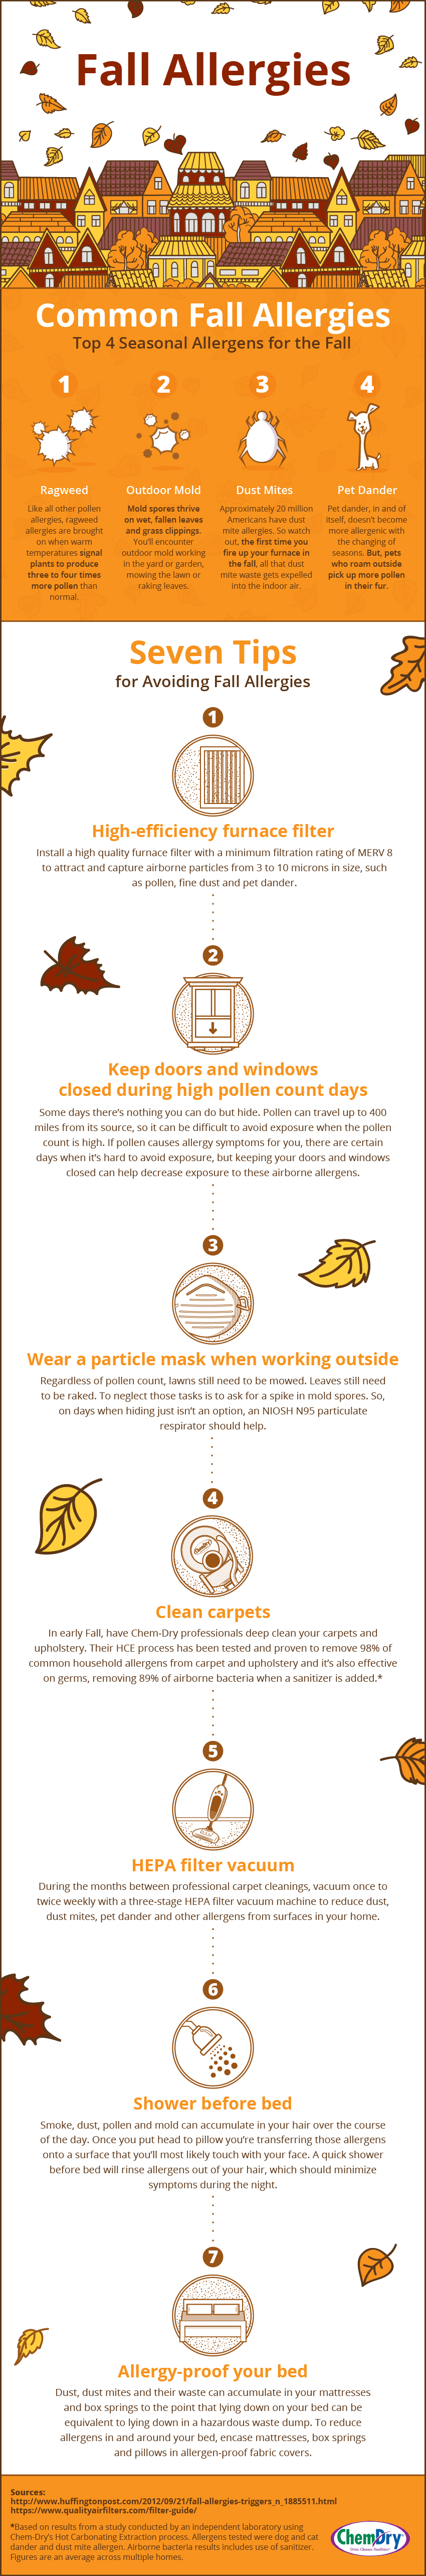 common fall allergies and 7 tips how to avoid them